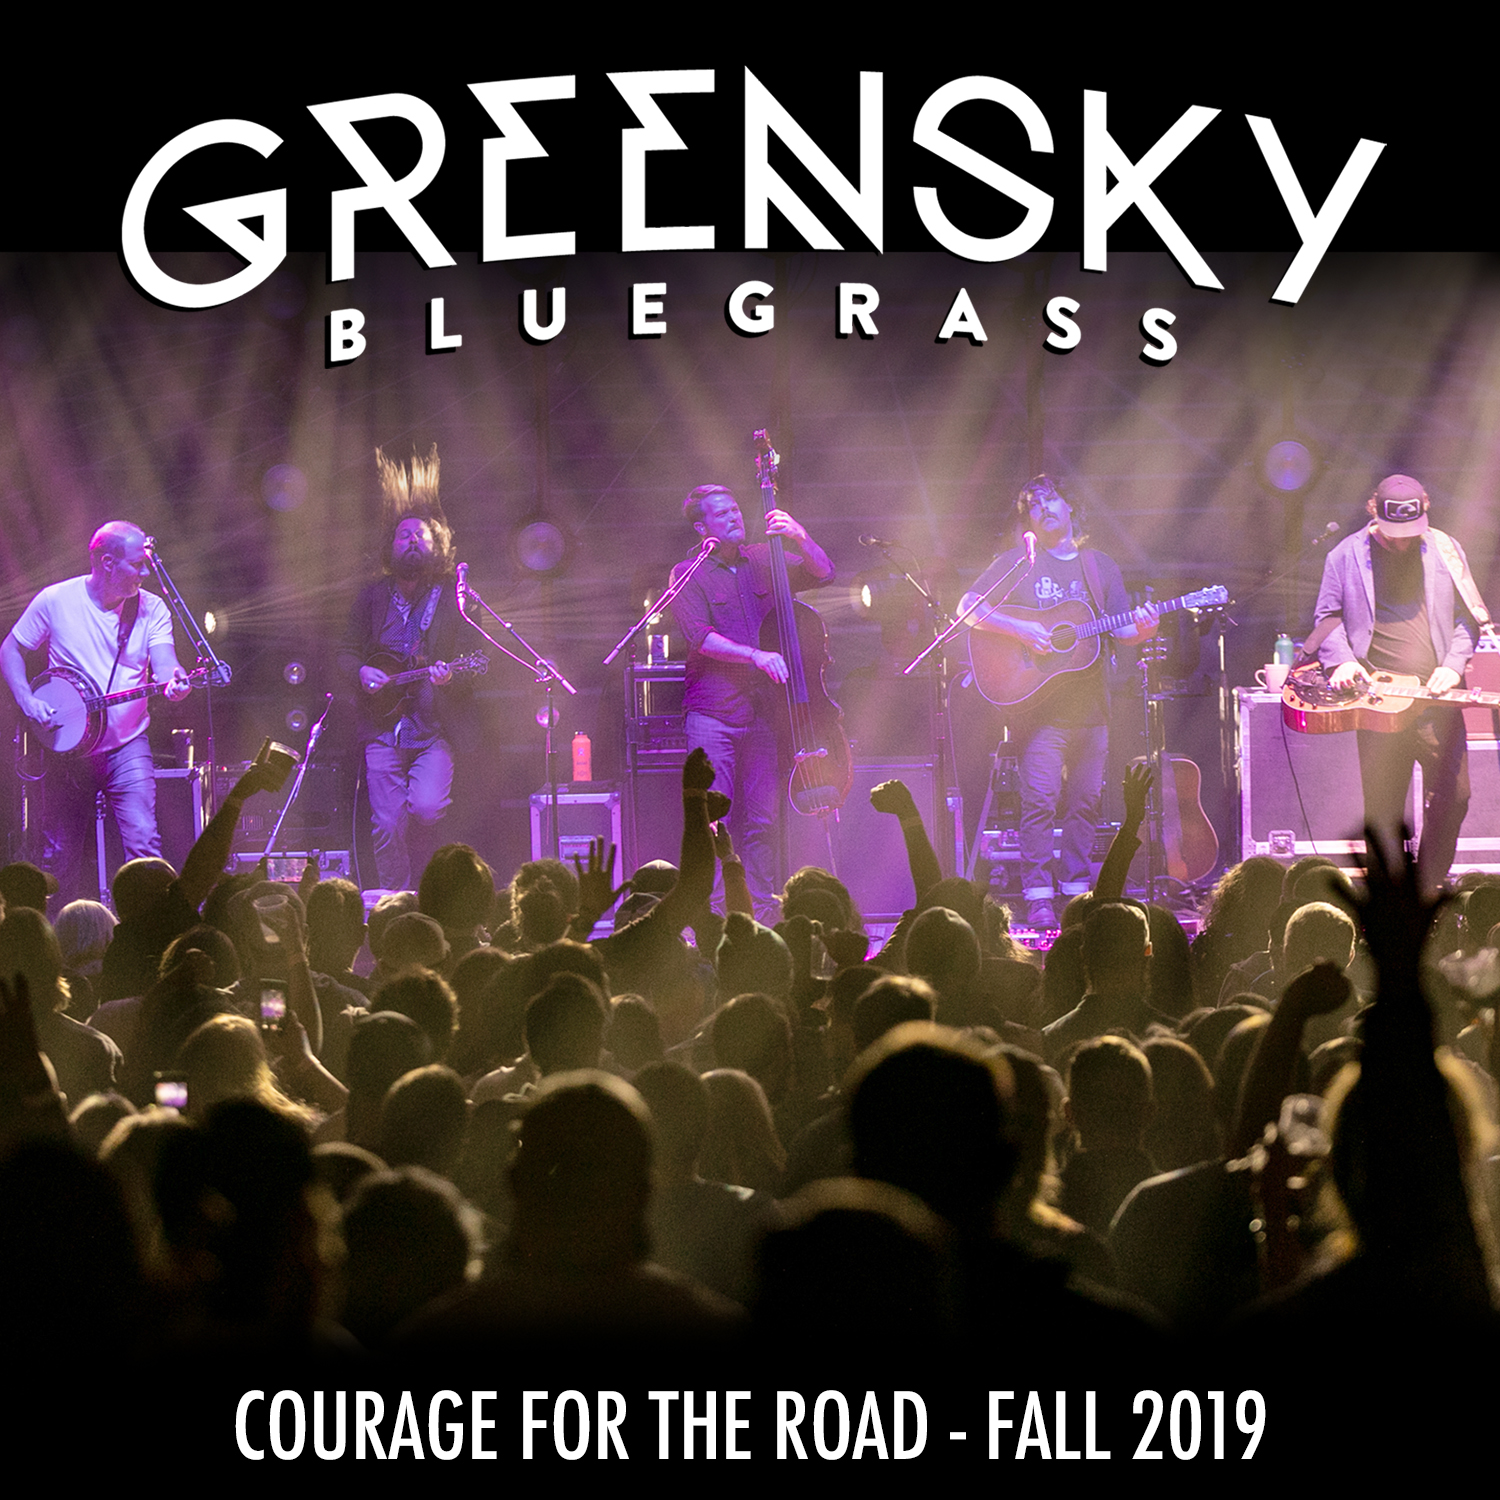 New Live Release From Greensky Bluegrass: Available Now for Streaming on Spotify